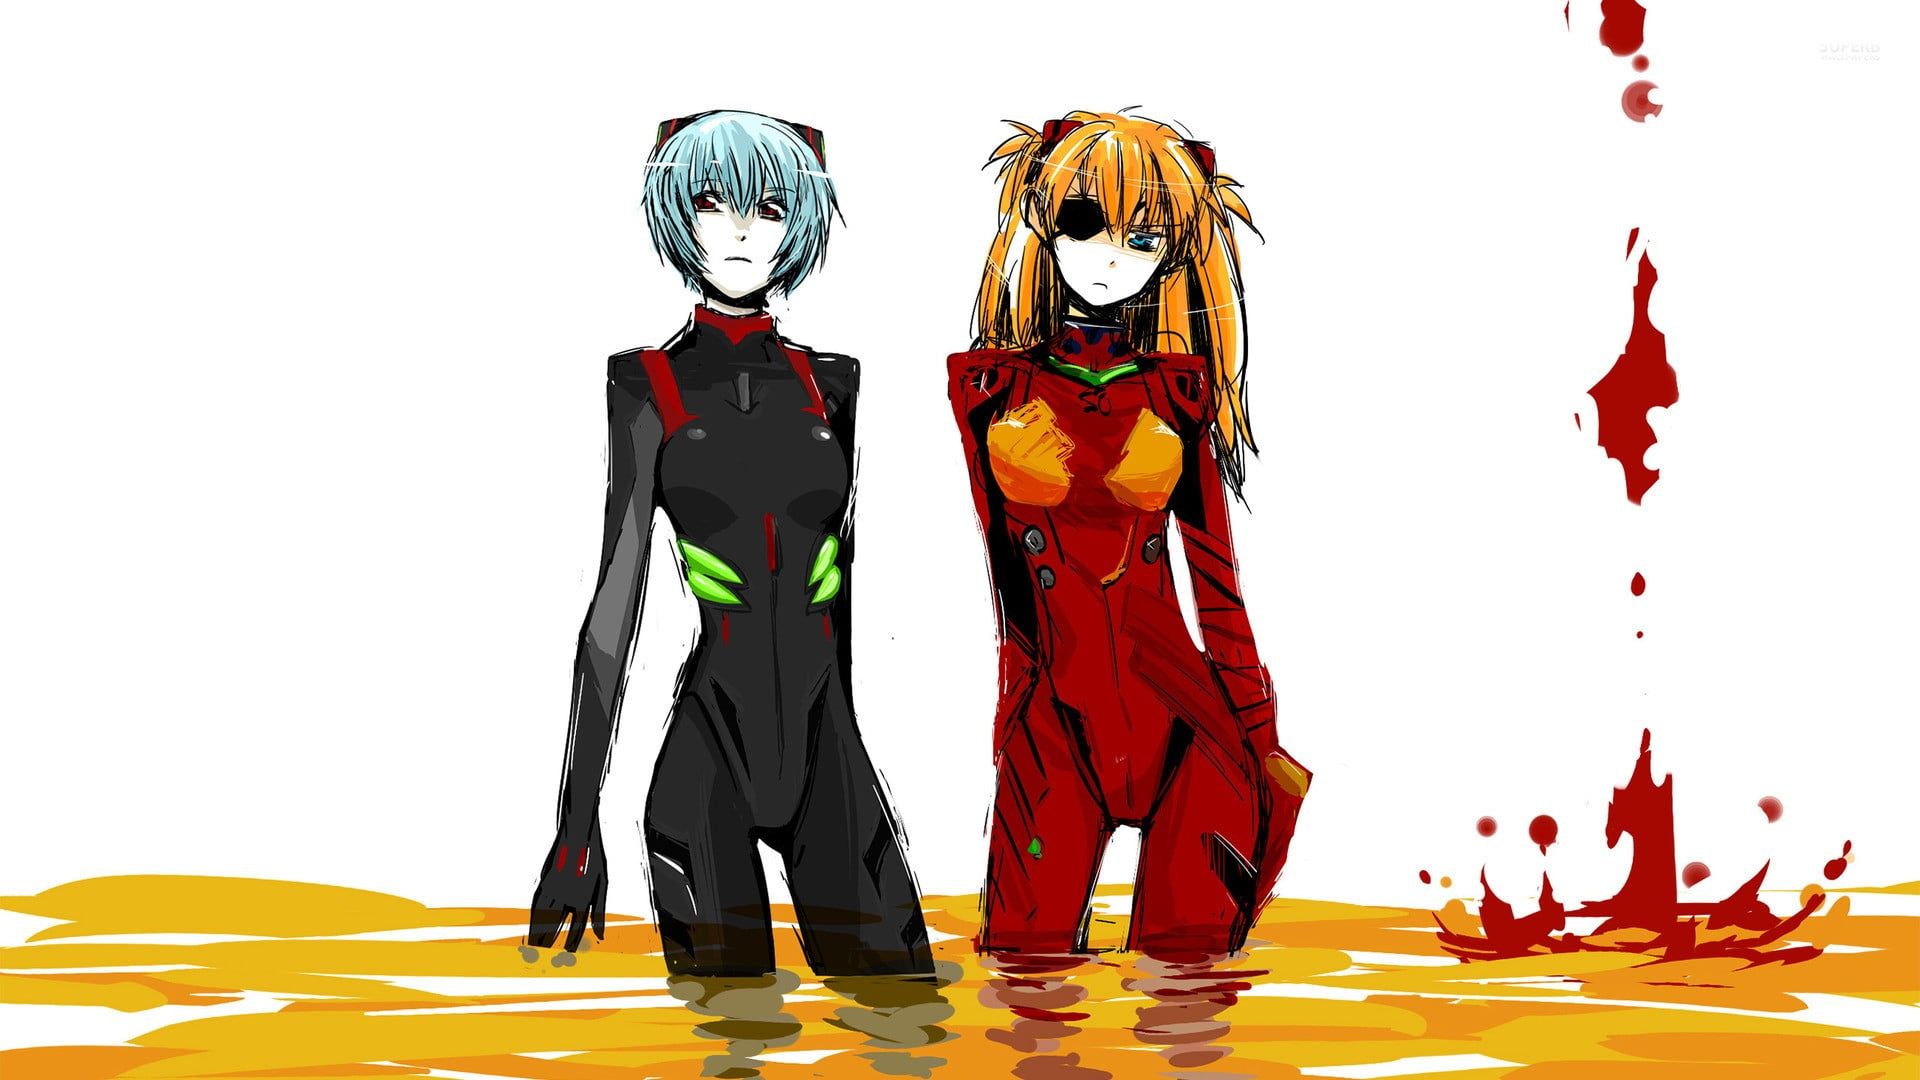 Rei Ayanami and Asuka Langley Soryu from Neon Genesis Evangelion